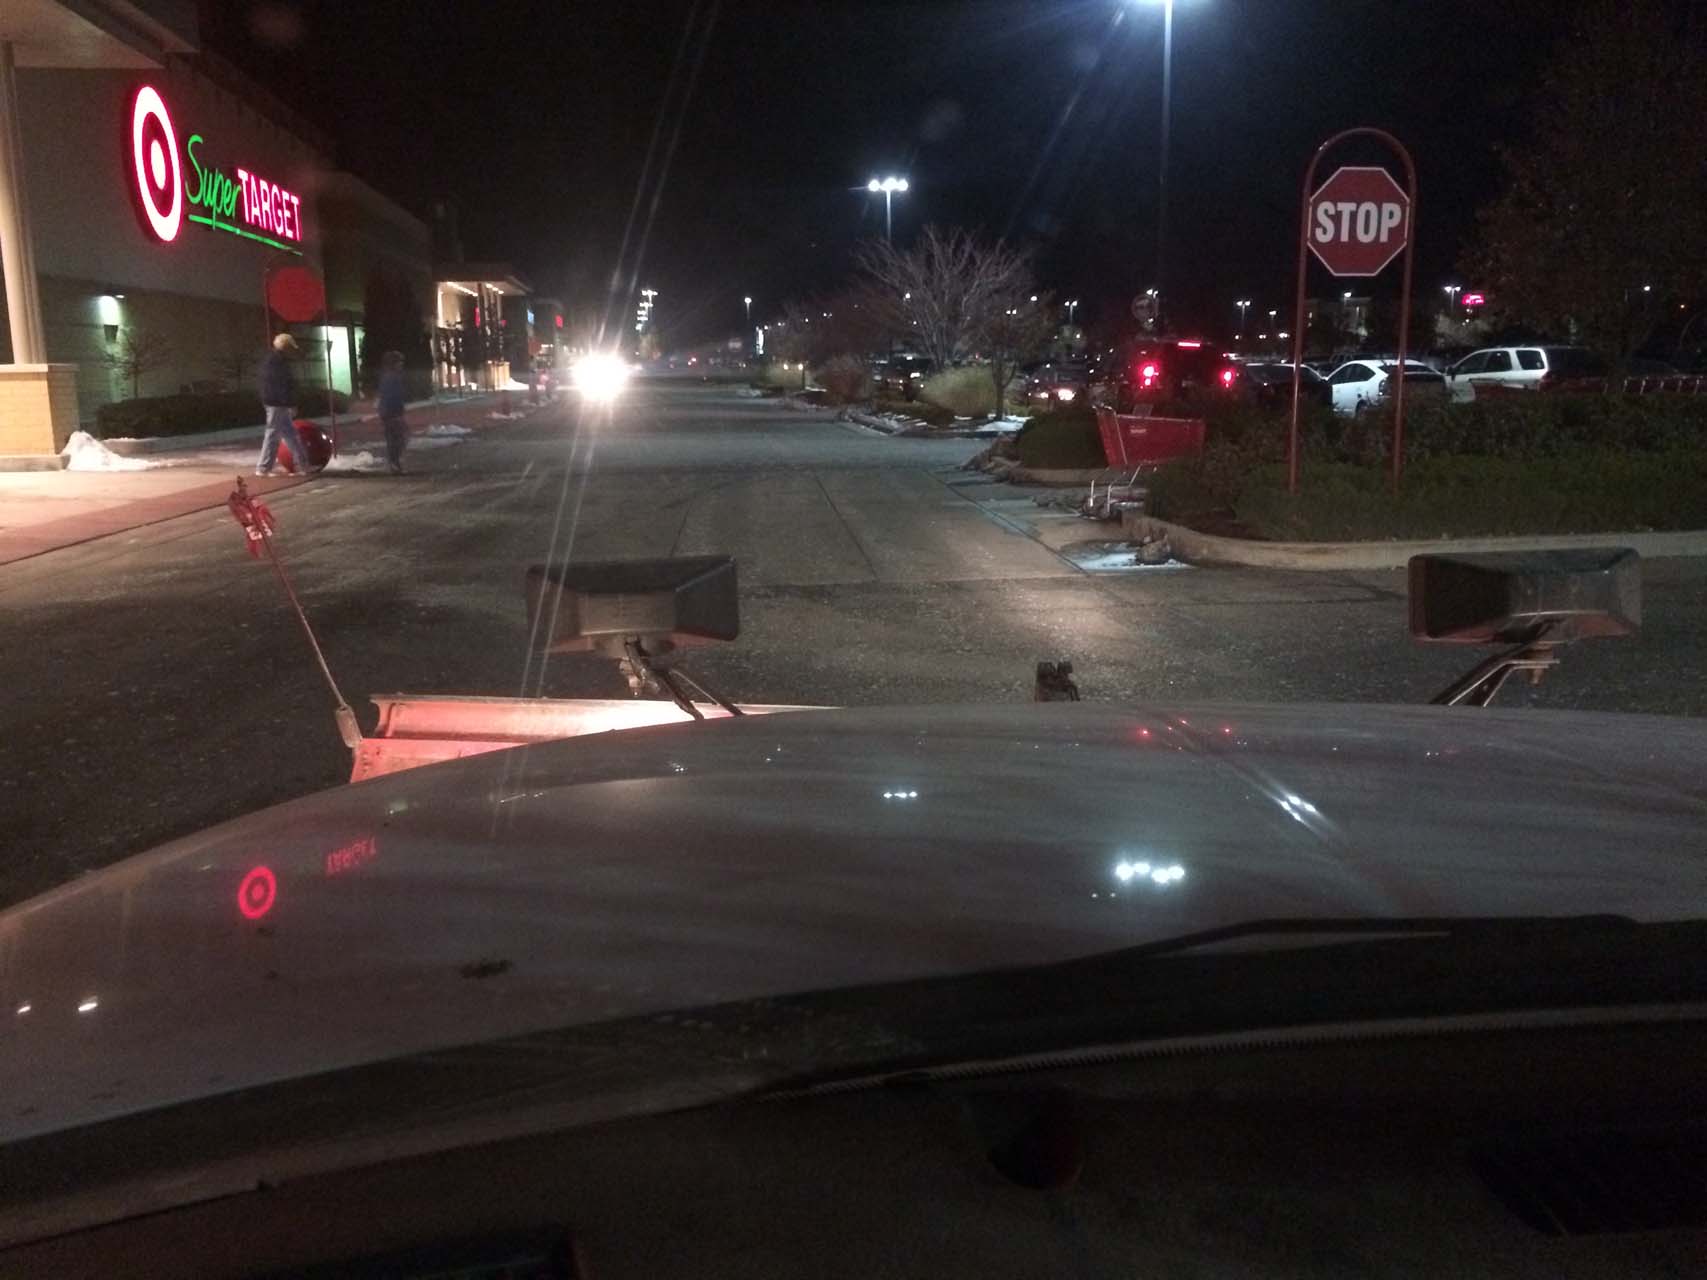 Snow removal vehicle drives down a parking lot at night